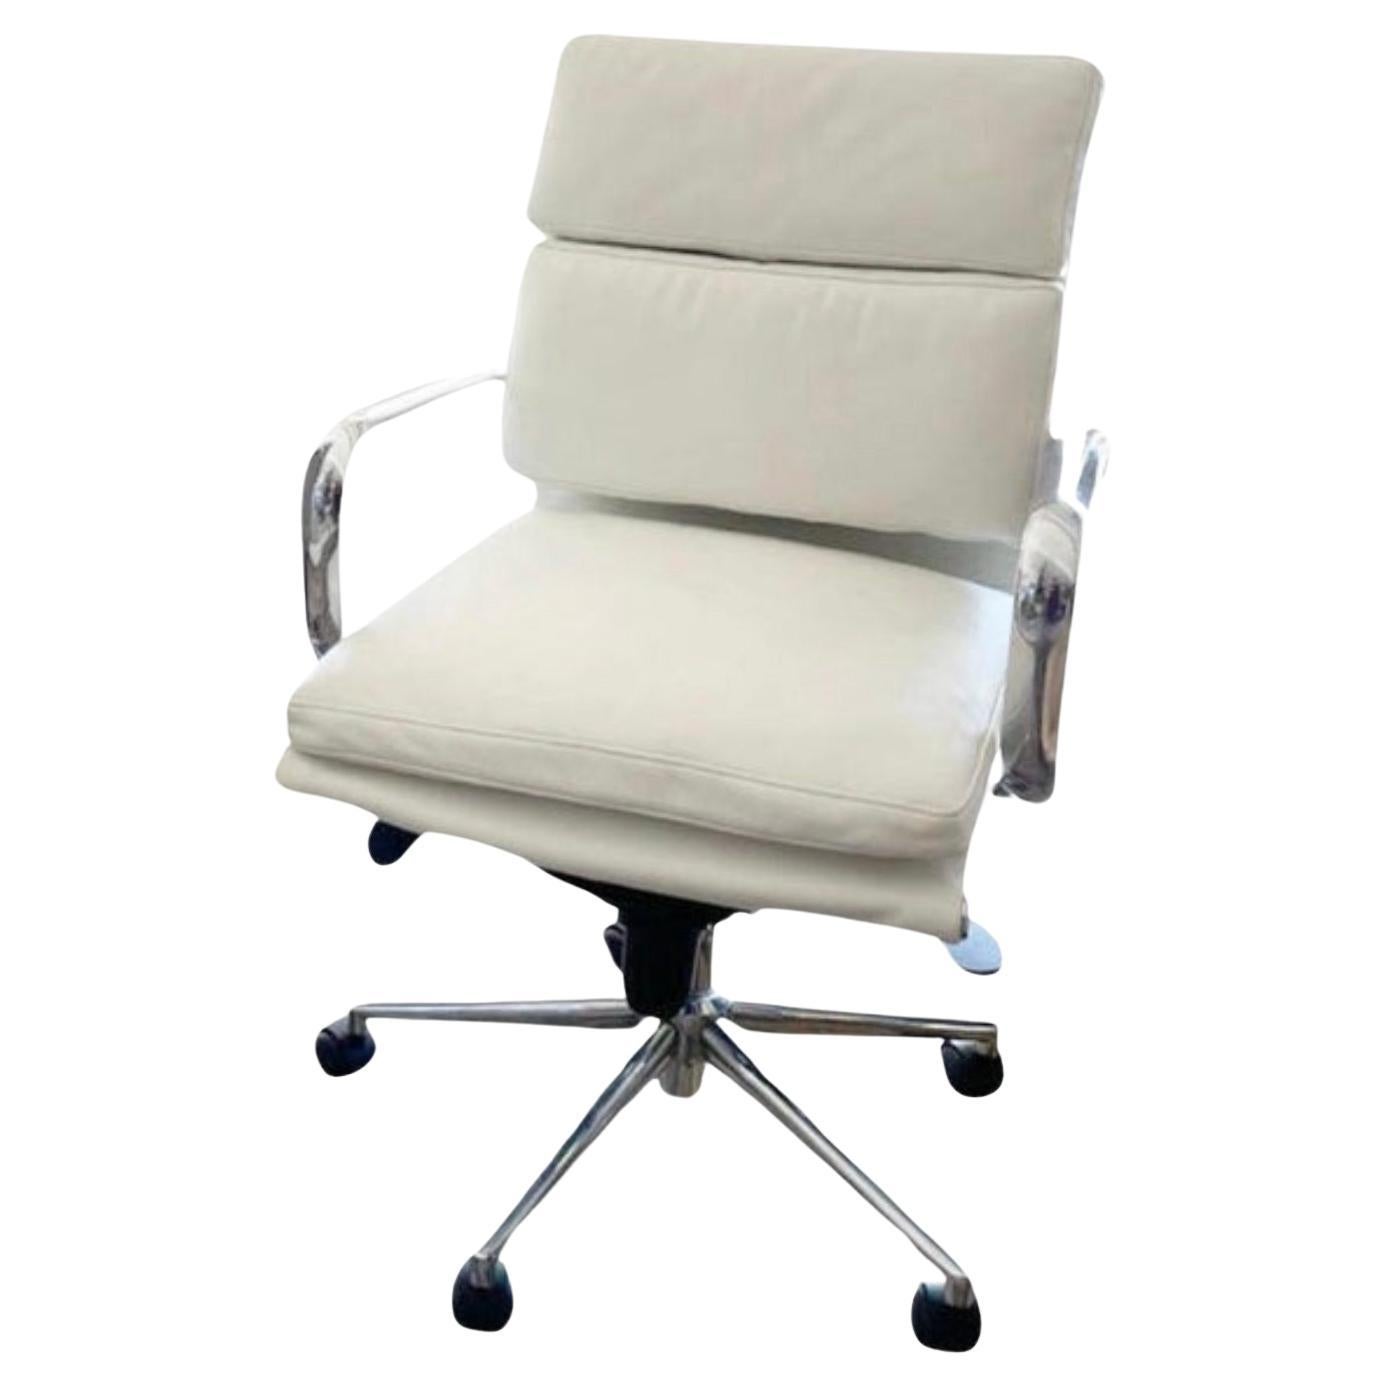 Herman Miller "Soft Pad" Chair For Sale